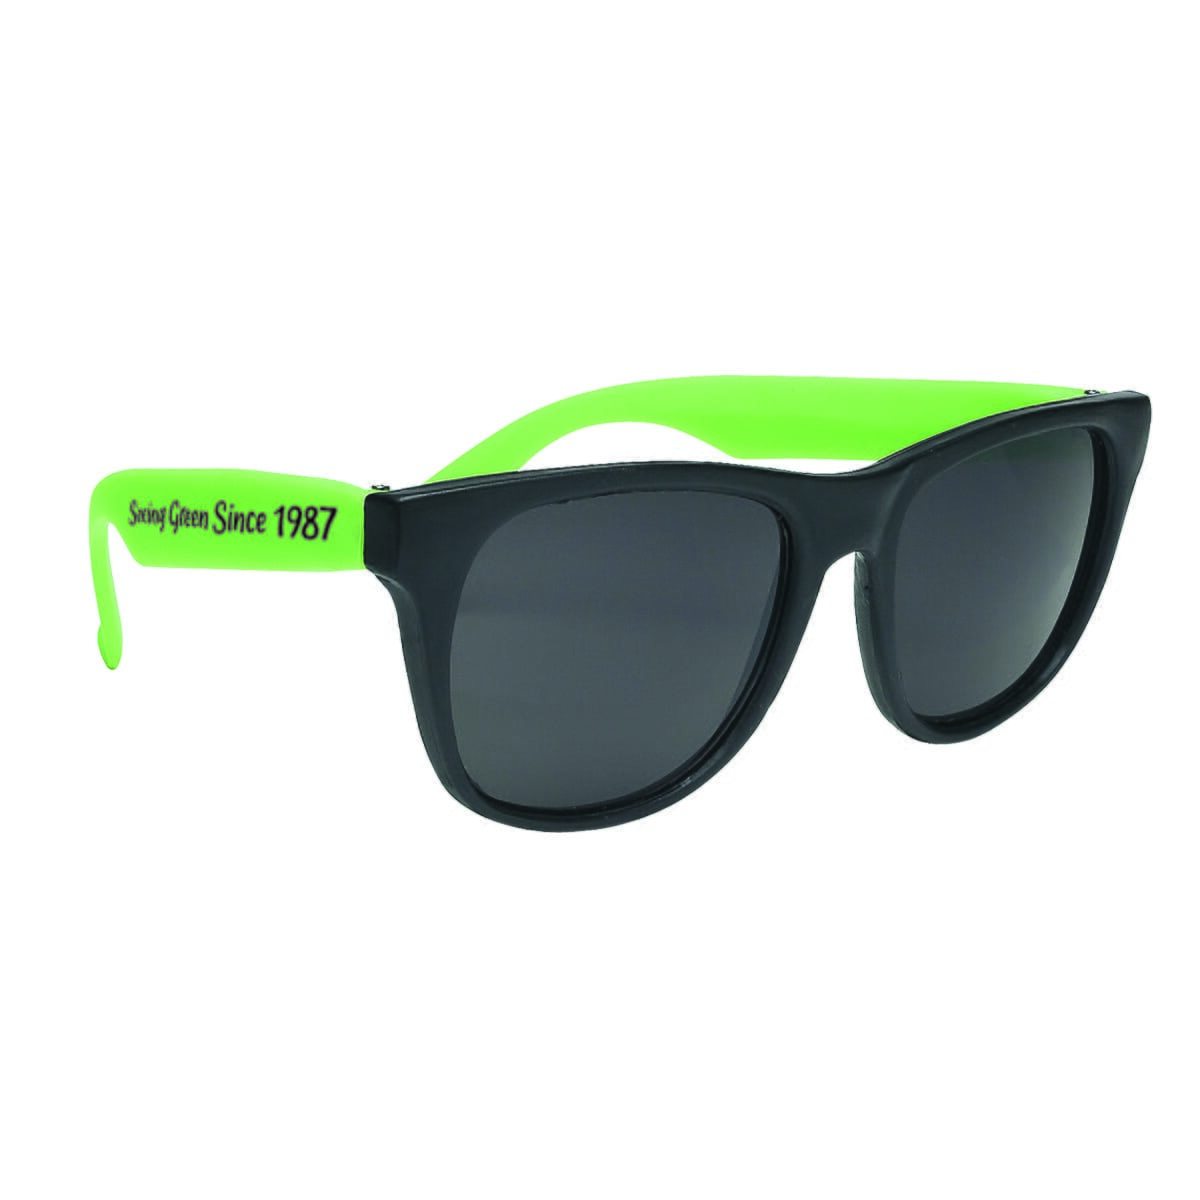 recycled sunglasses with logo